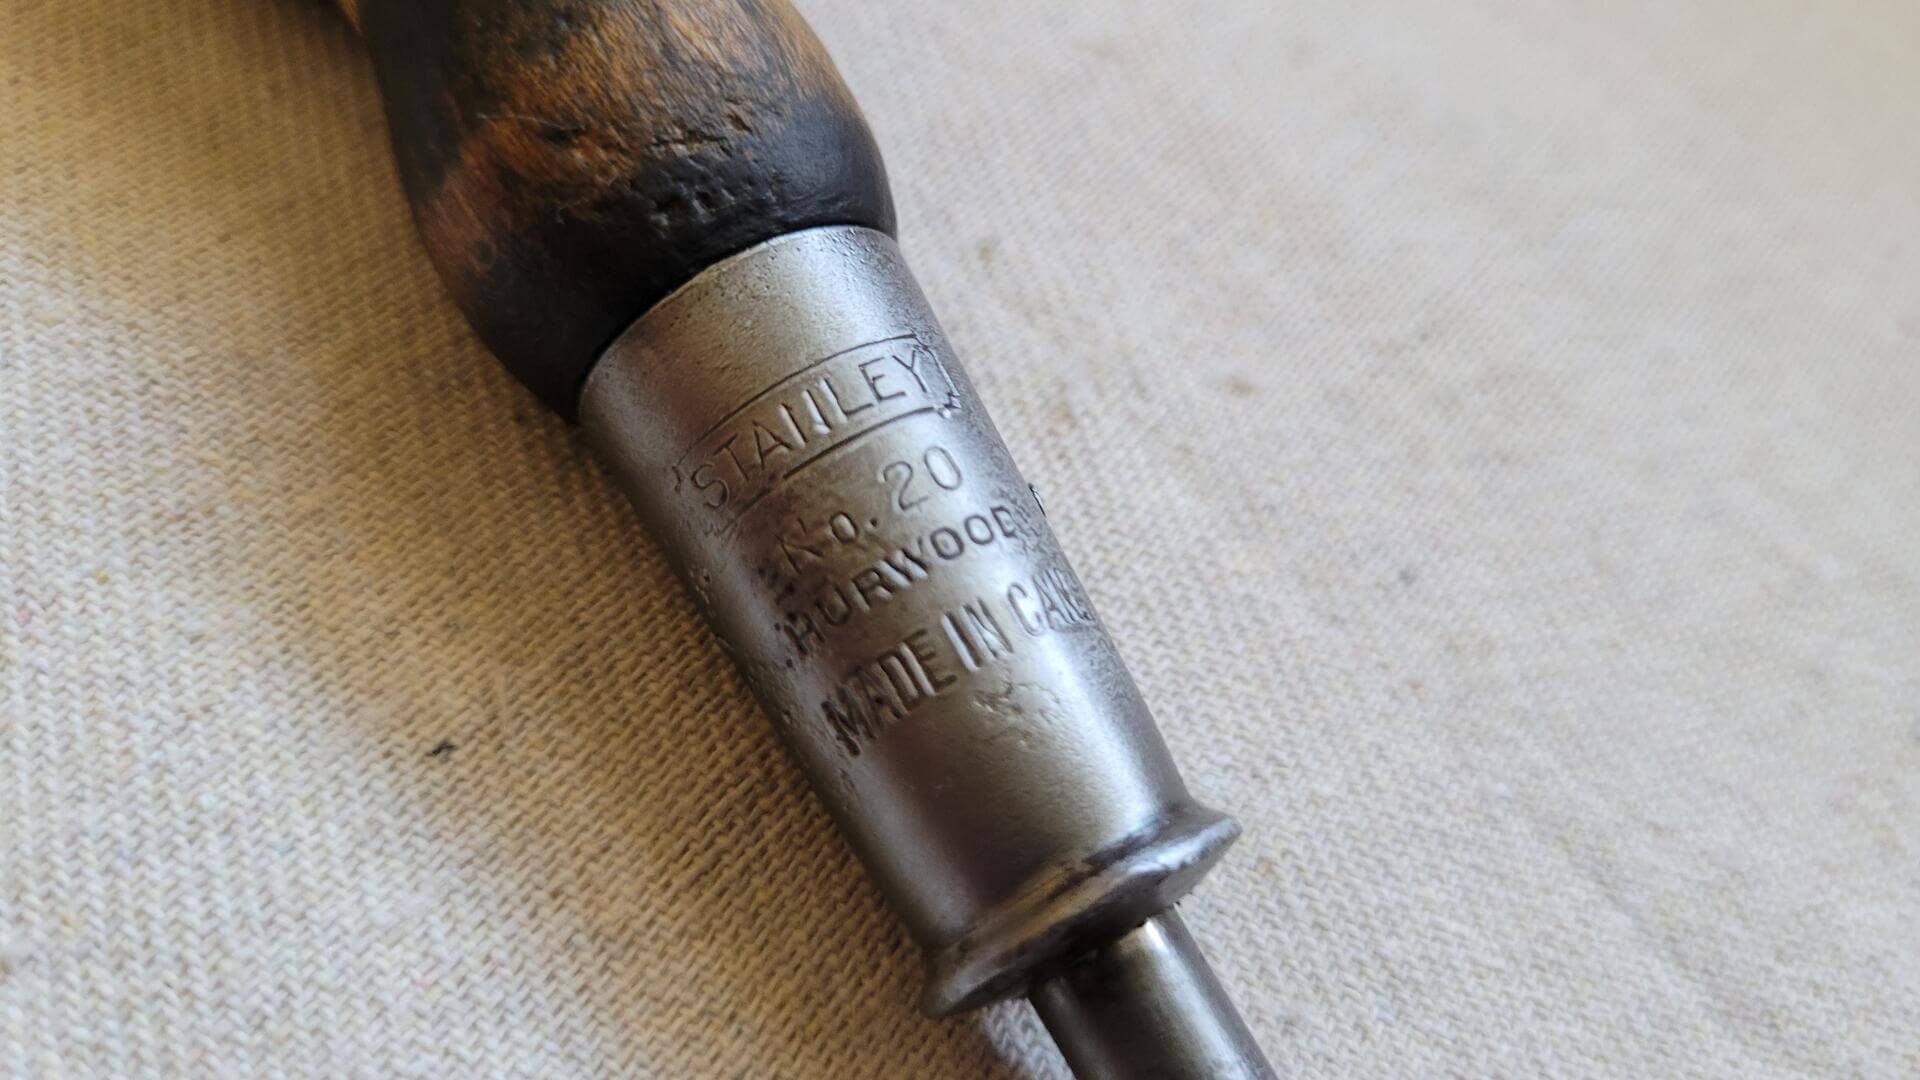 Rare Stanley No 20 Hurwood Flat Screwdriver with wooden handle - Antique and Vintage Made in Canada collectible hand tools